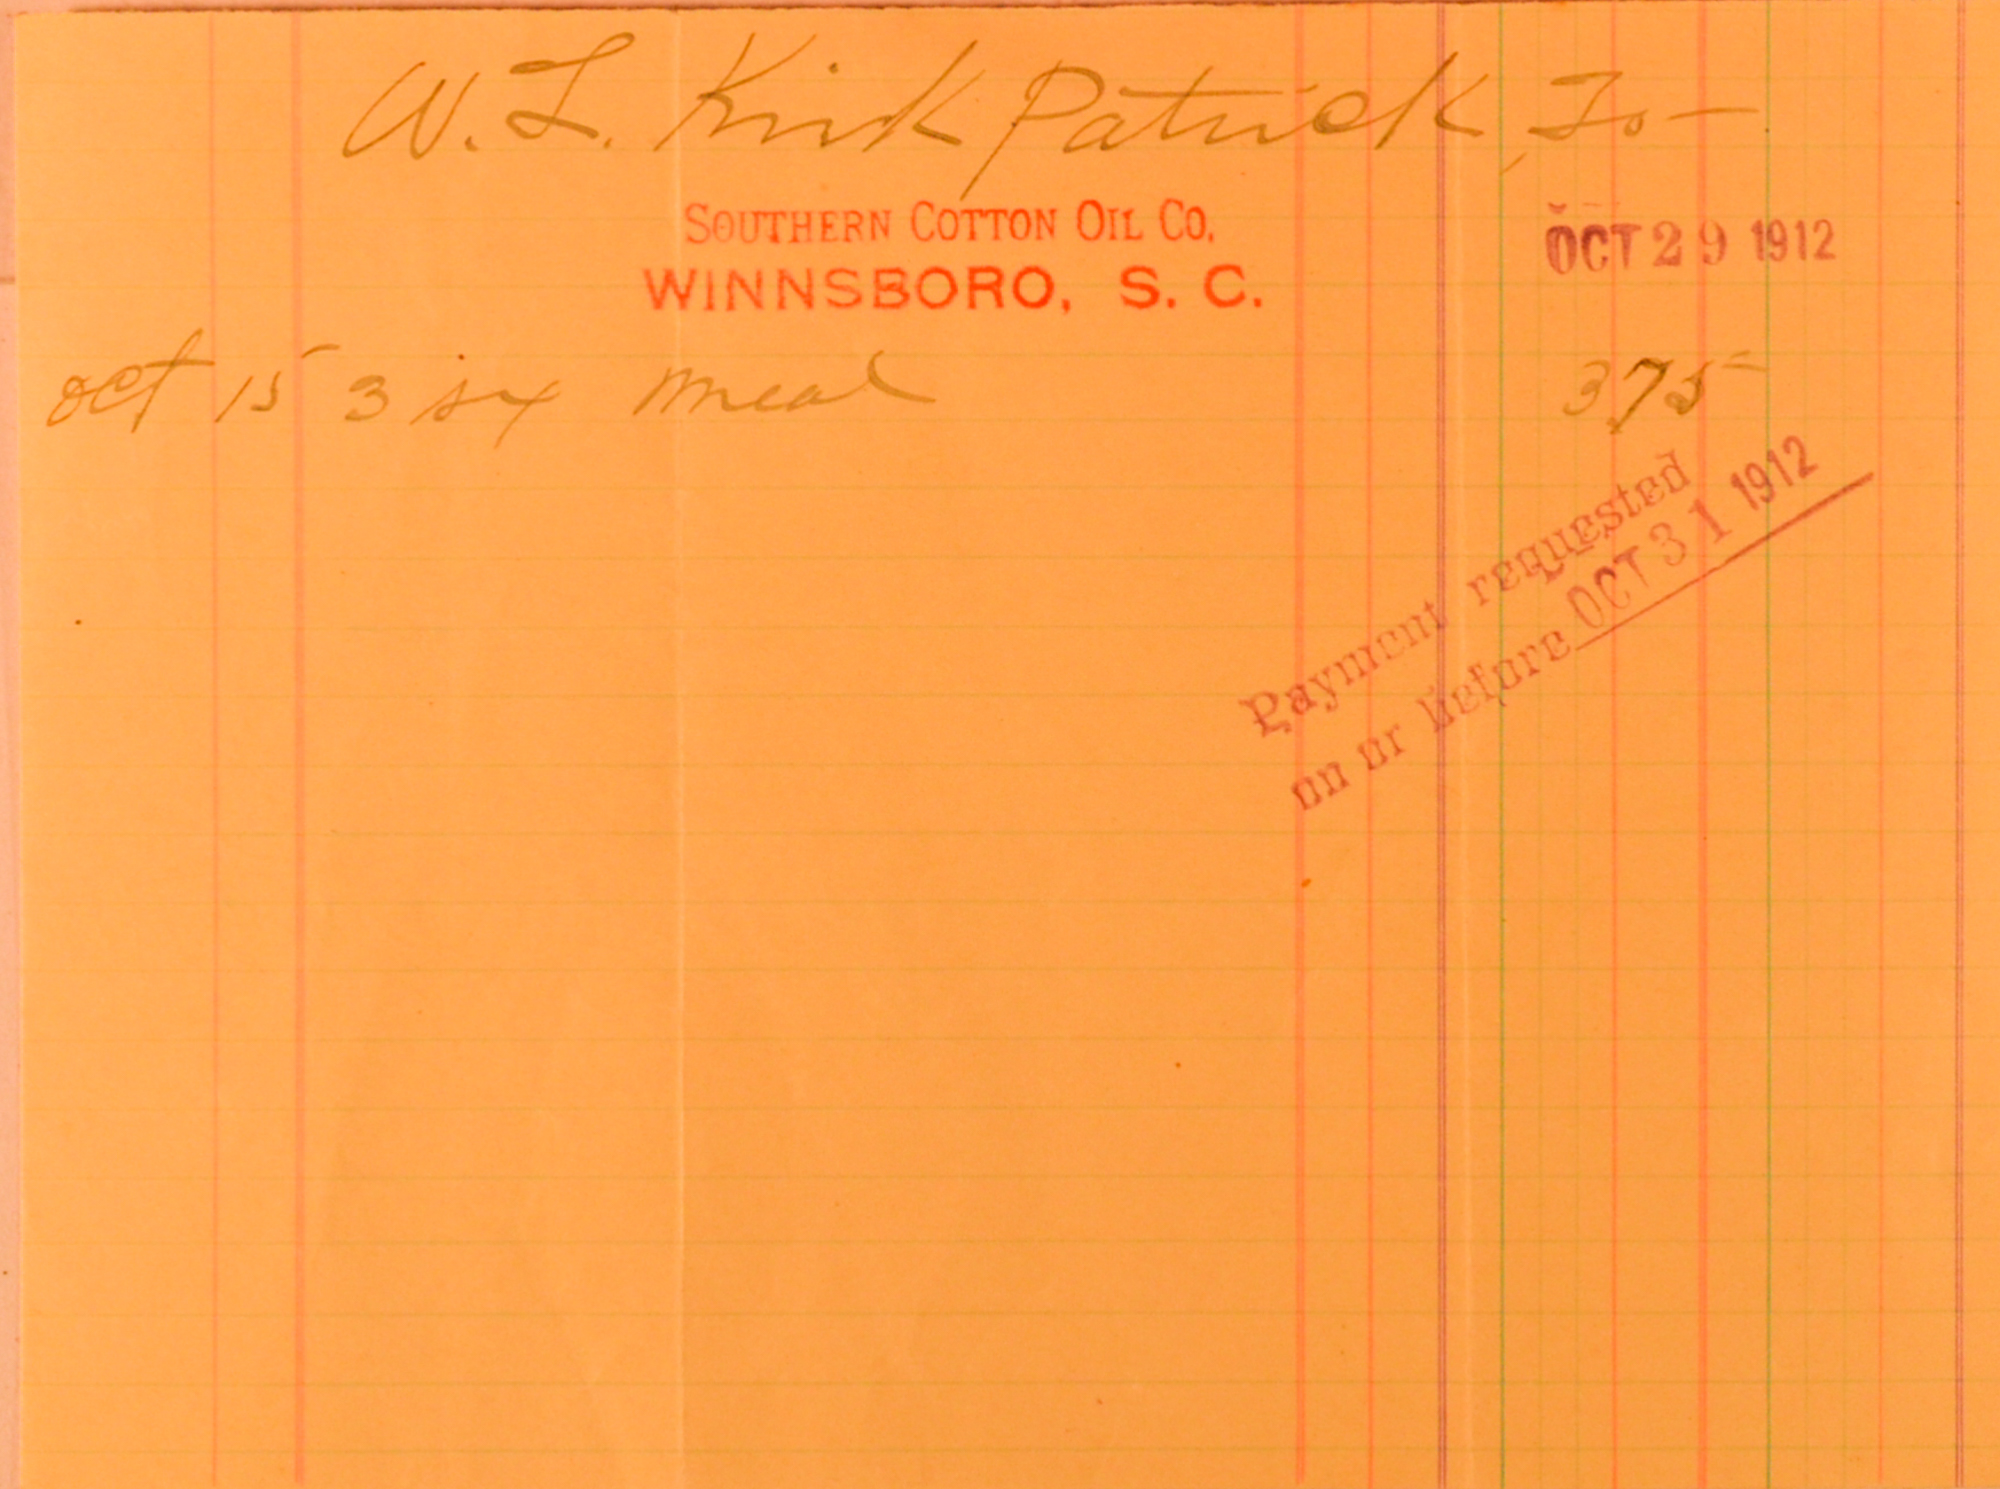 RECEIPT FOR SOUTHERN OIL CO - 1912